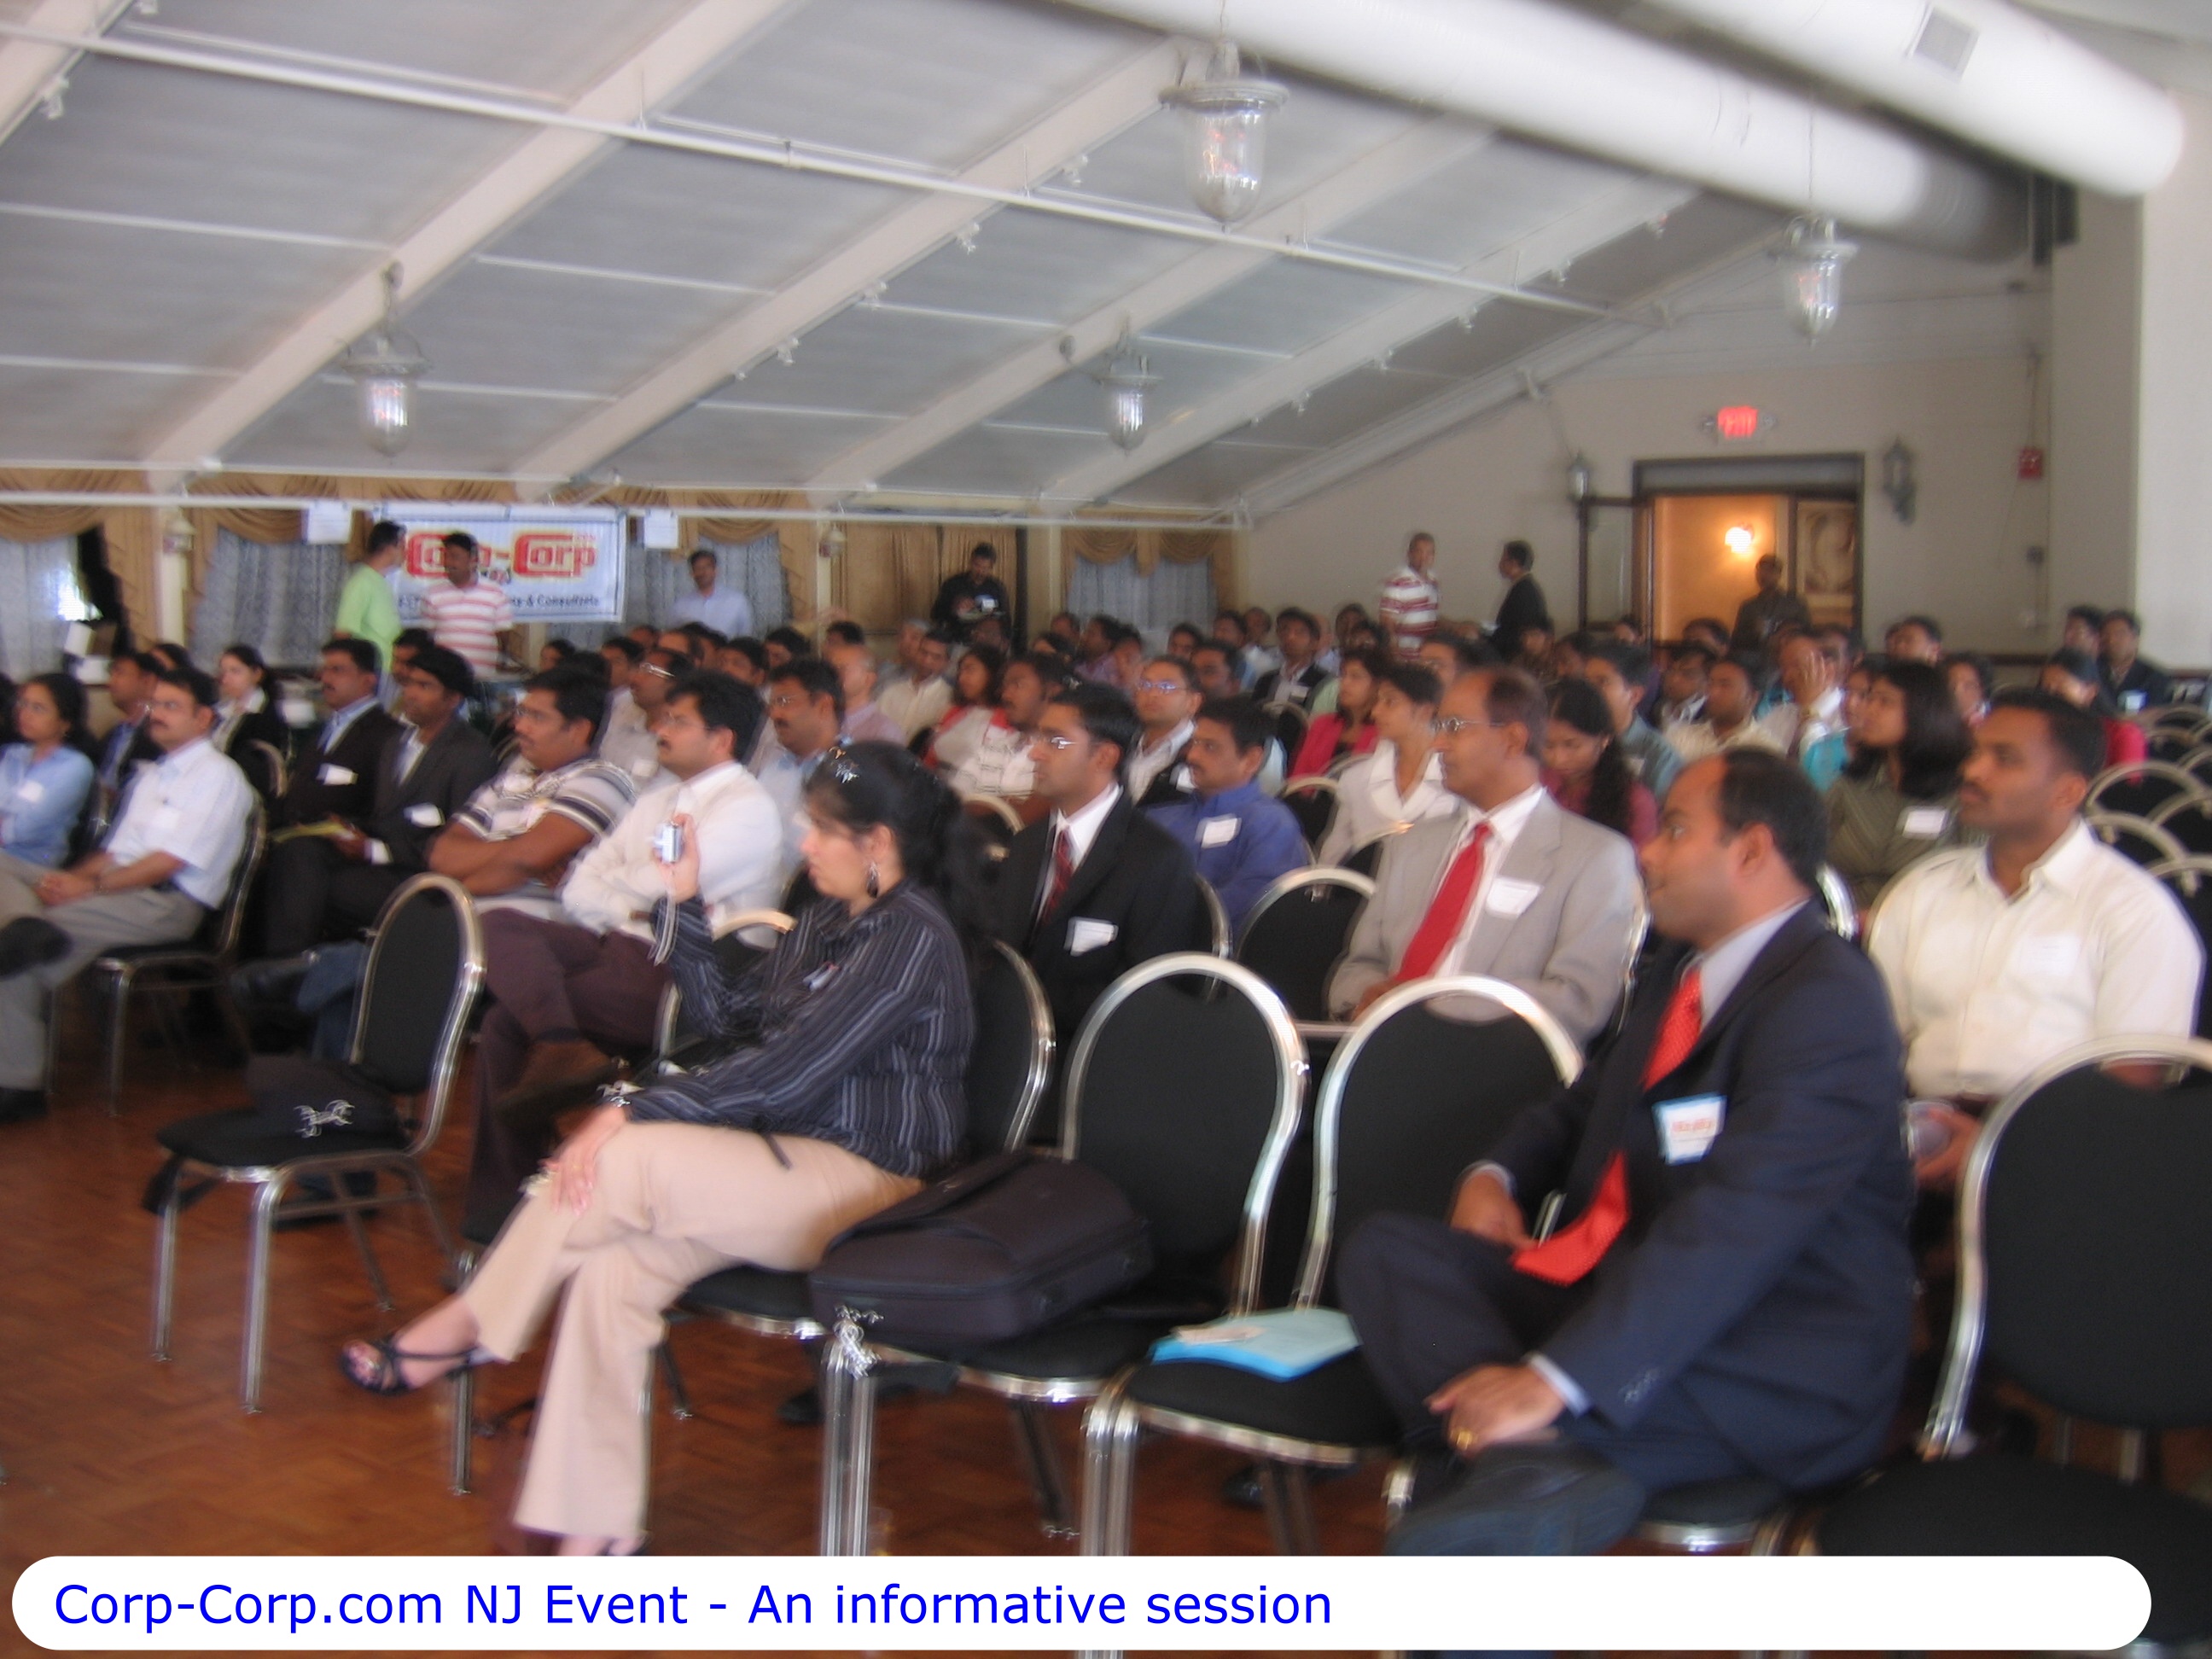 Corp-Corp.com NJ Event - An informative session